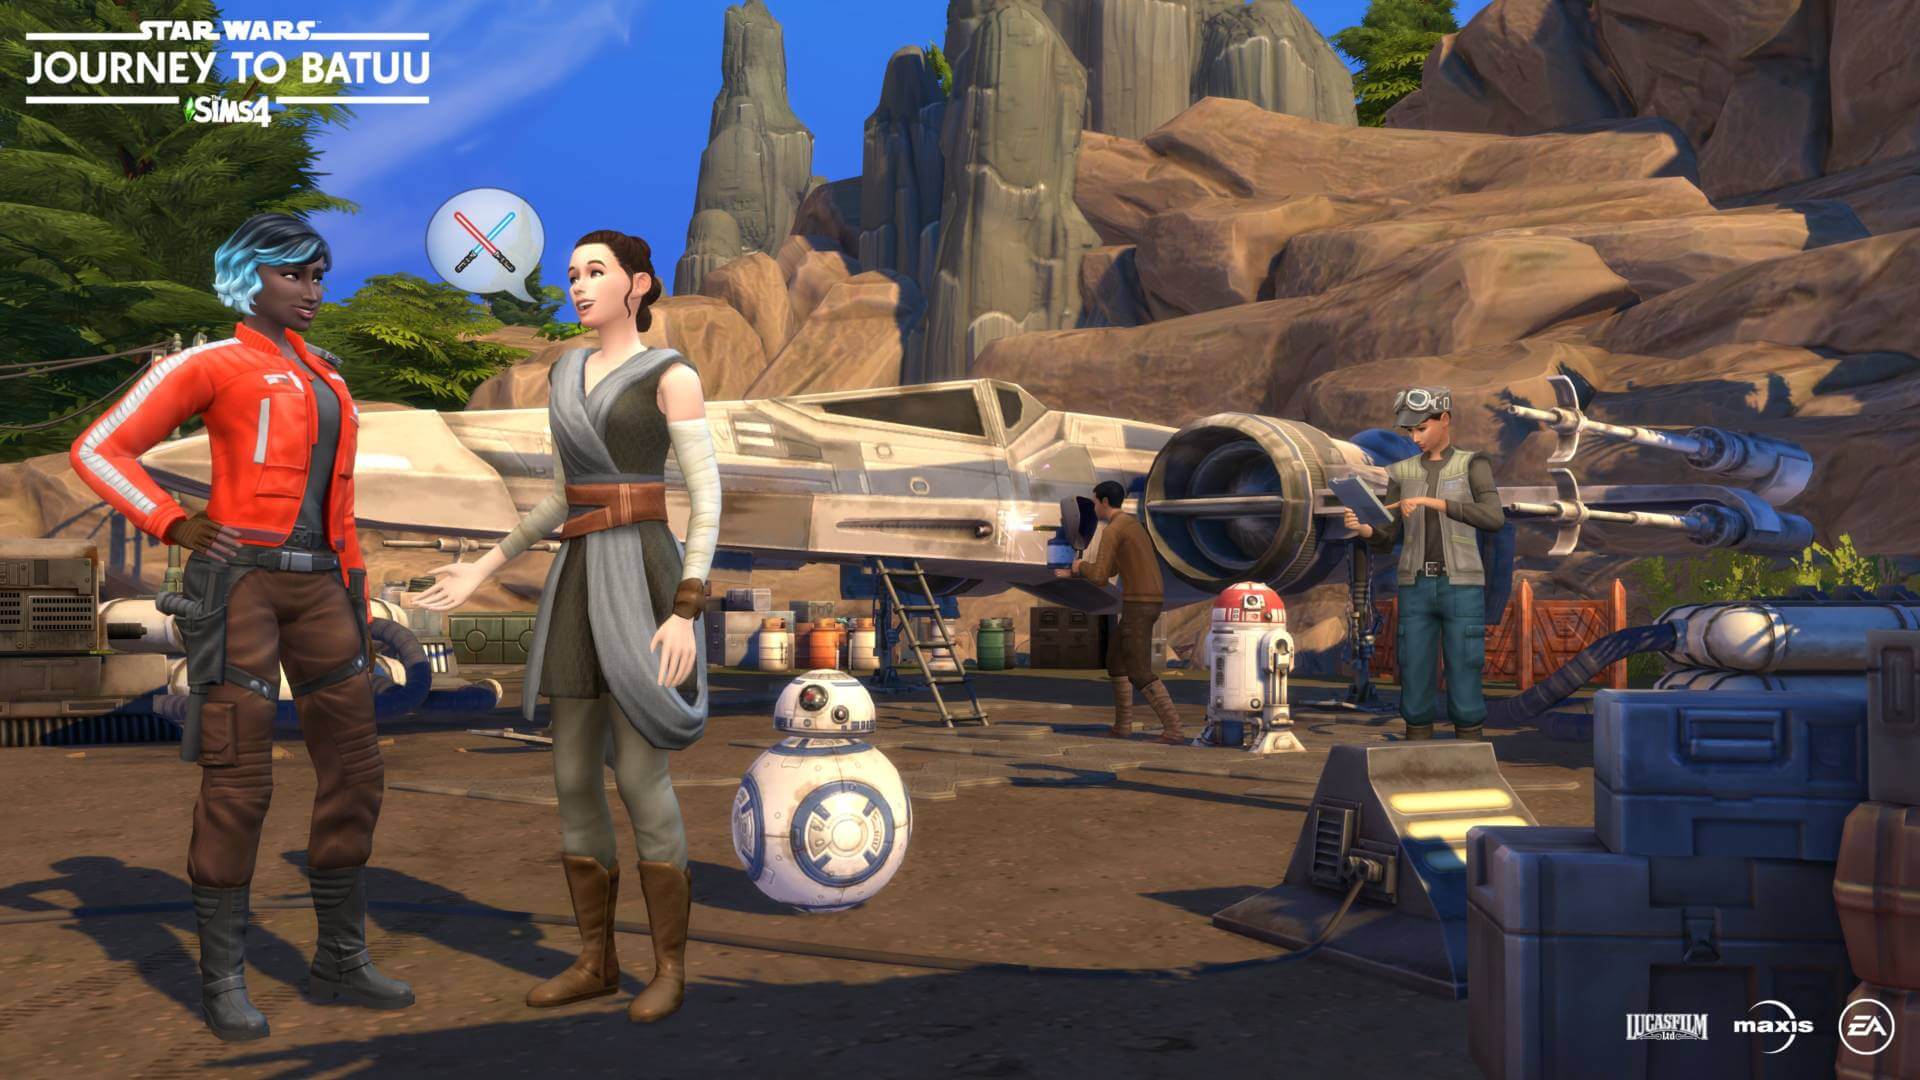 Sims Journey to Batuu, The Sims Take on Galaxy&#8217;s Edge in Star Wars: Journey to Batuu Game Pack